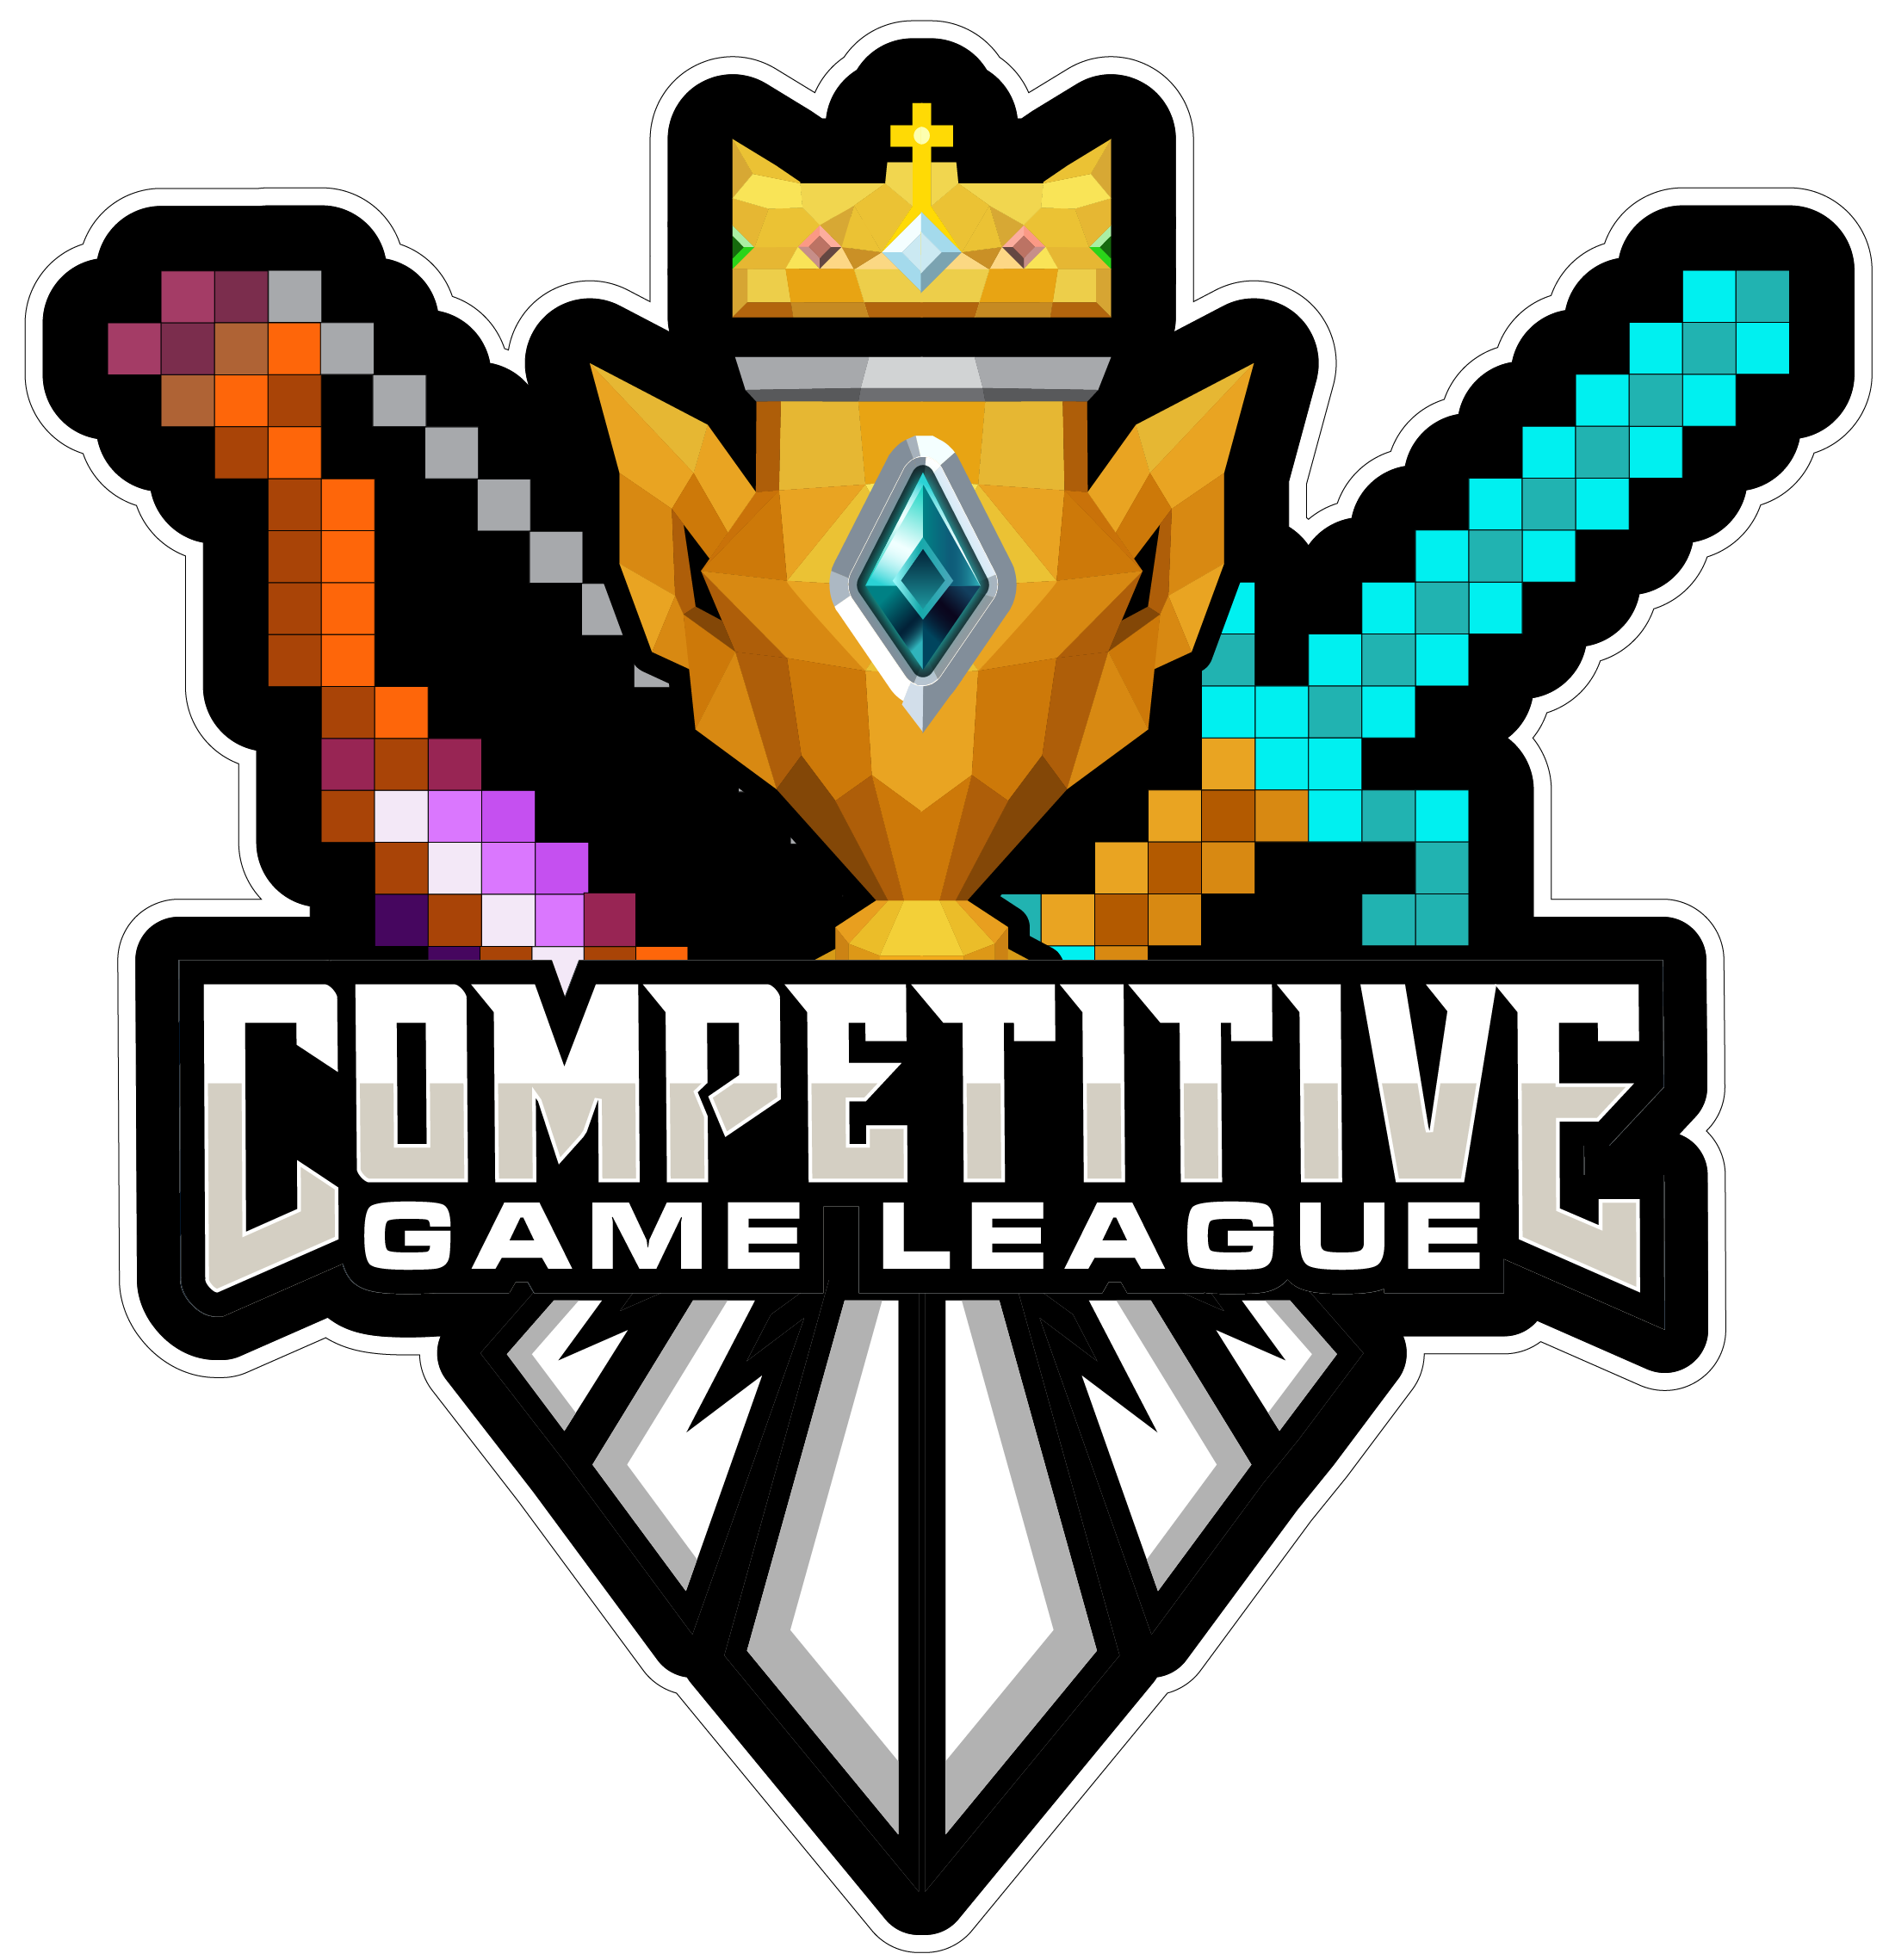 Competitive Game League Rev 10 Final-01R.png